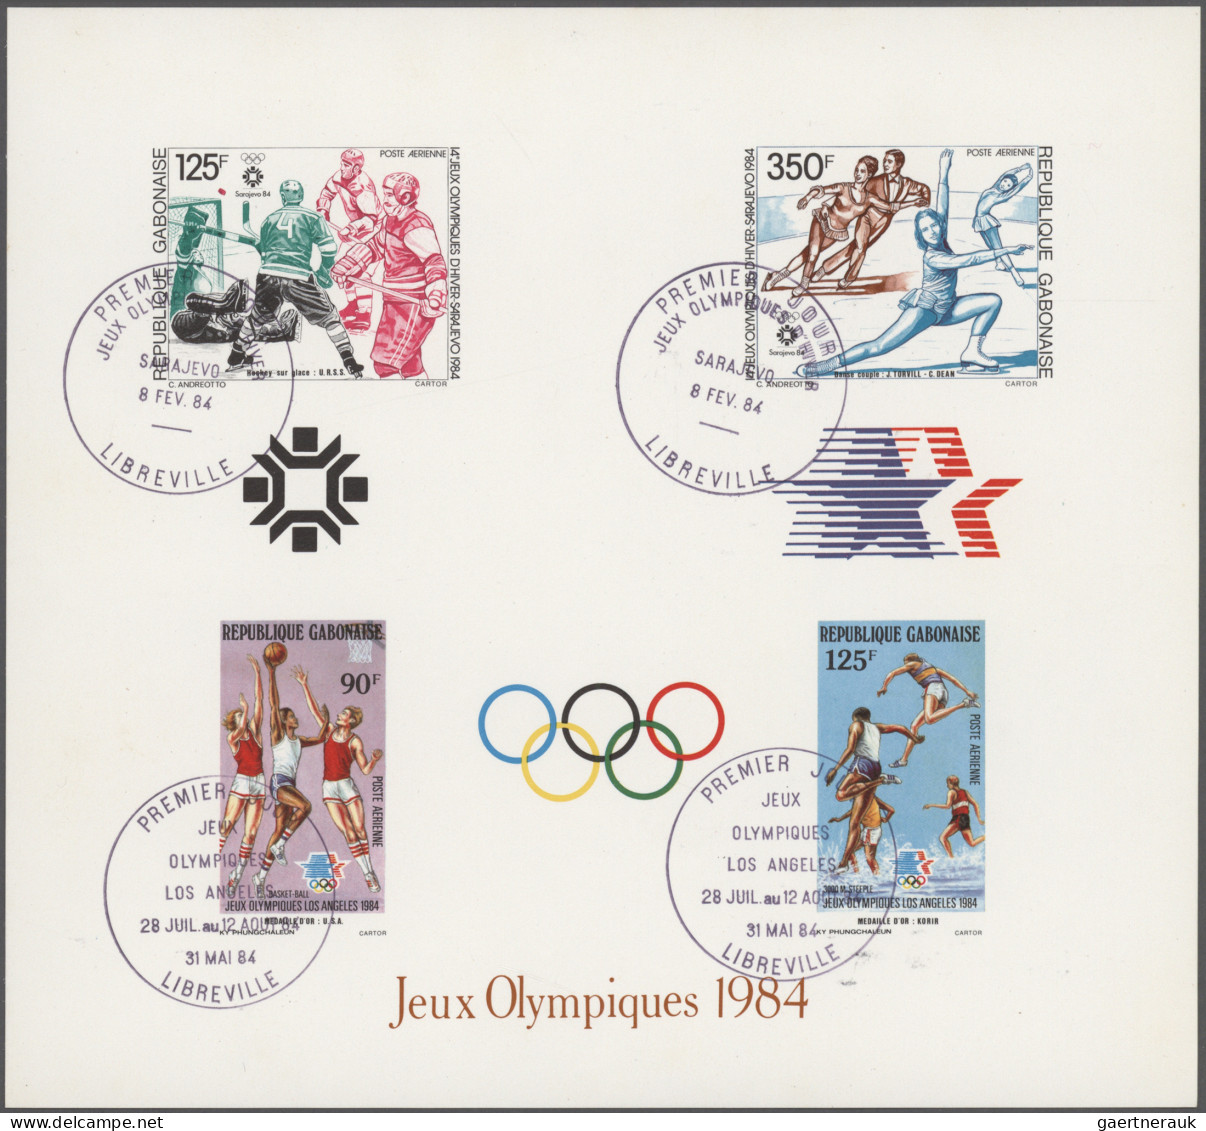 Thematics: sport-basketball: 1934/2004, extraordinary top collection of apprx. 1